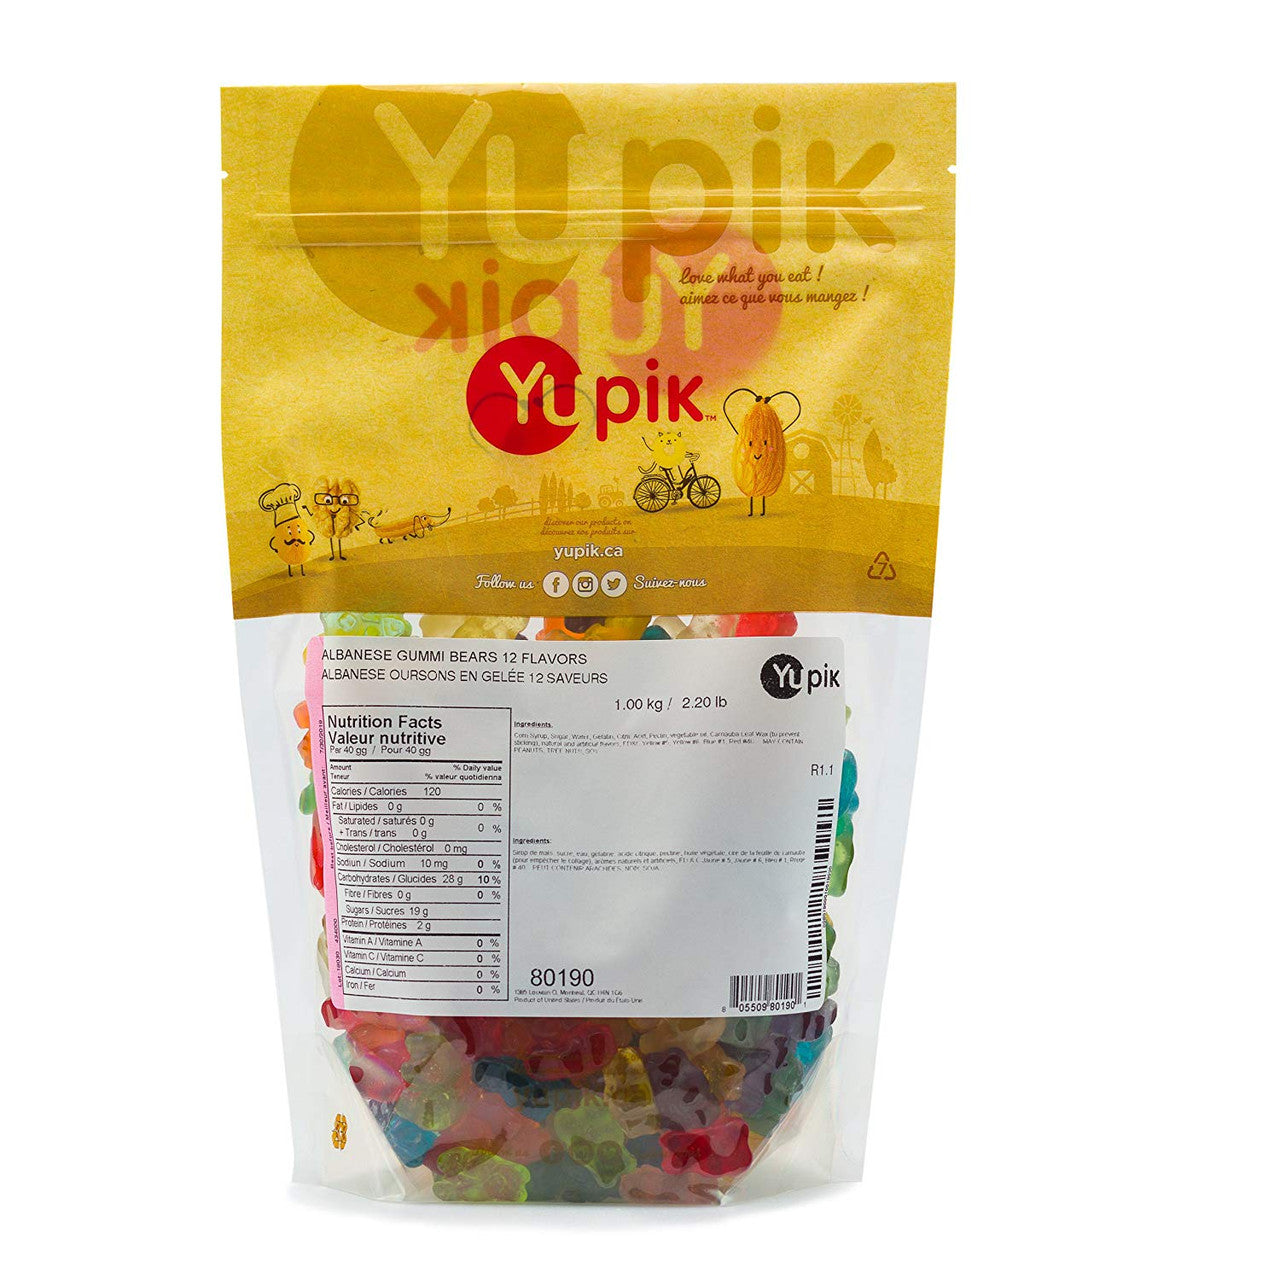 Yupik Gummy Bears 12 Flavors, 1kg/2.2 lbs.., (Imported from Canada)